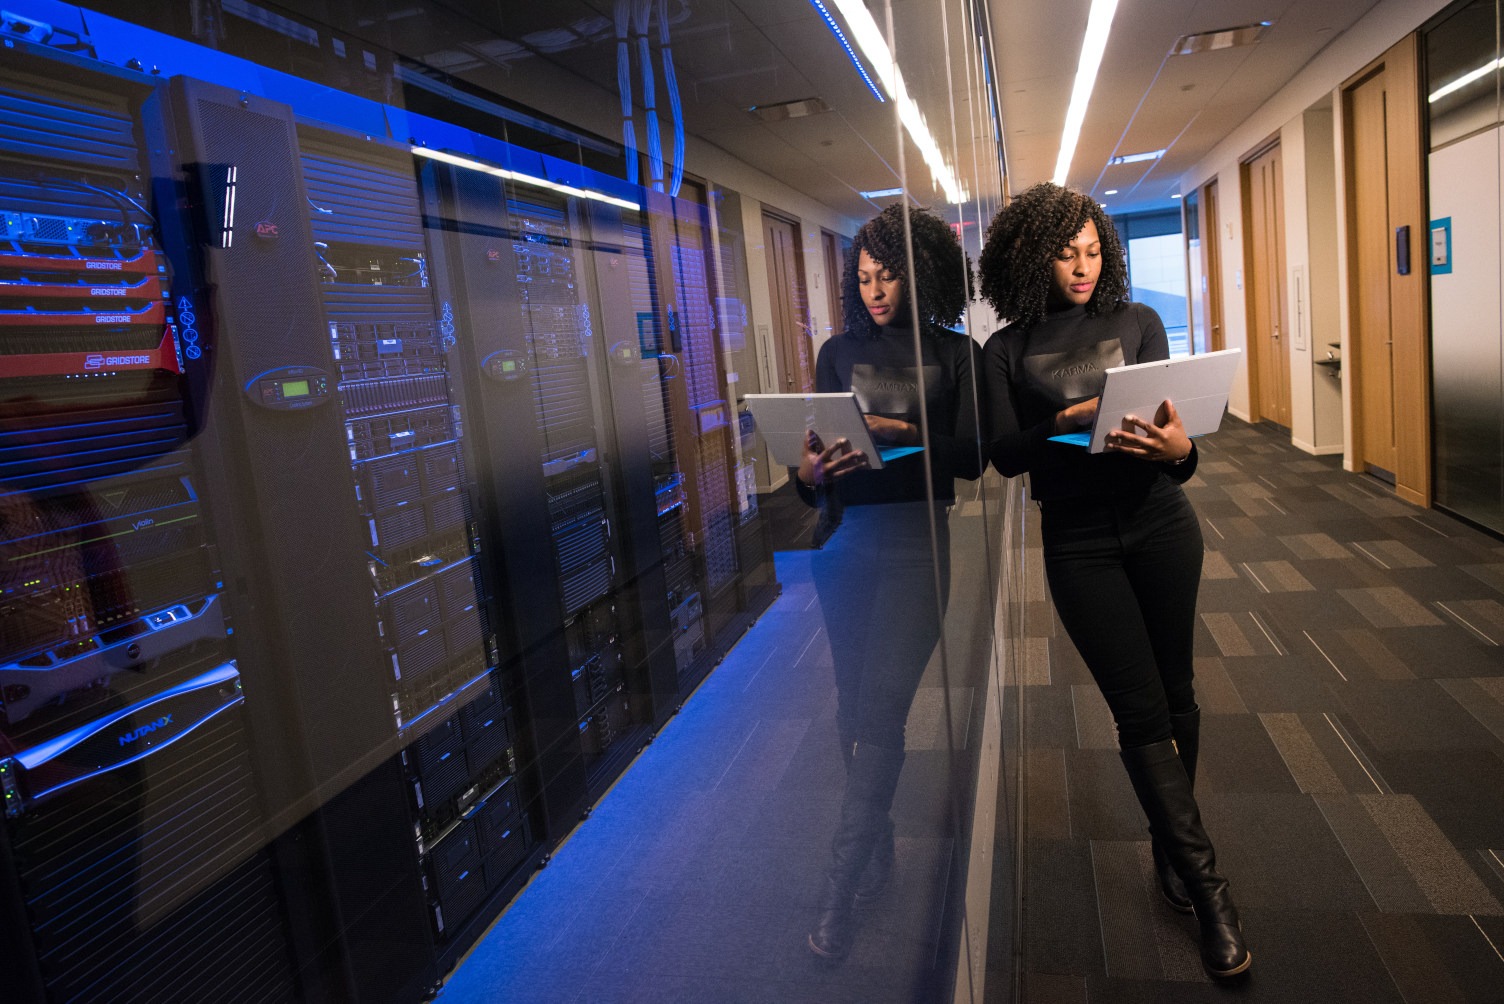 Digital Transformation in Business Featured Image of a Woman Holding a Laptop Next to a Glass Wall With a Server Behind It in a Business Office